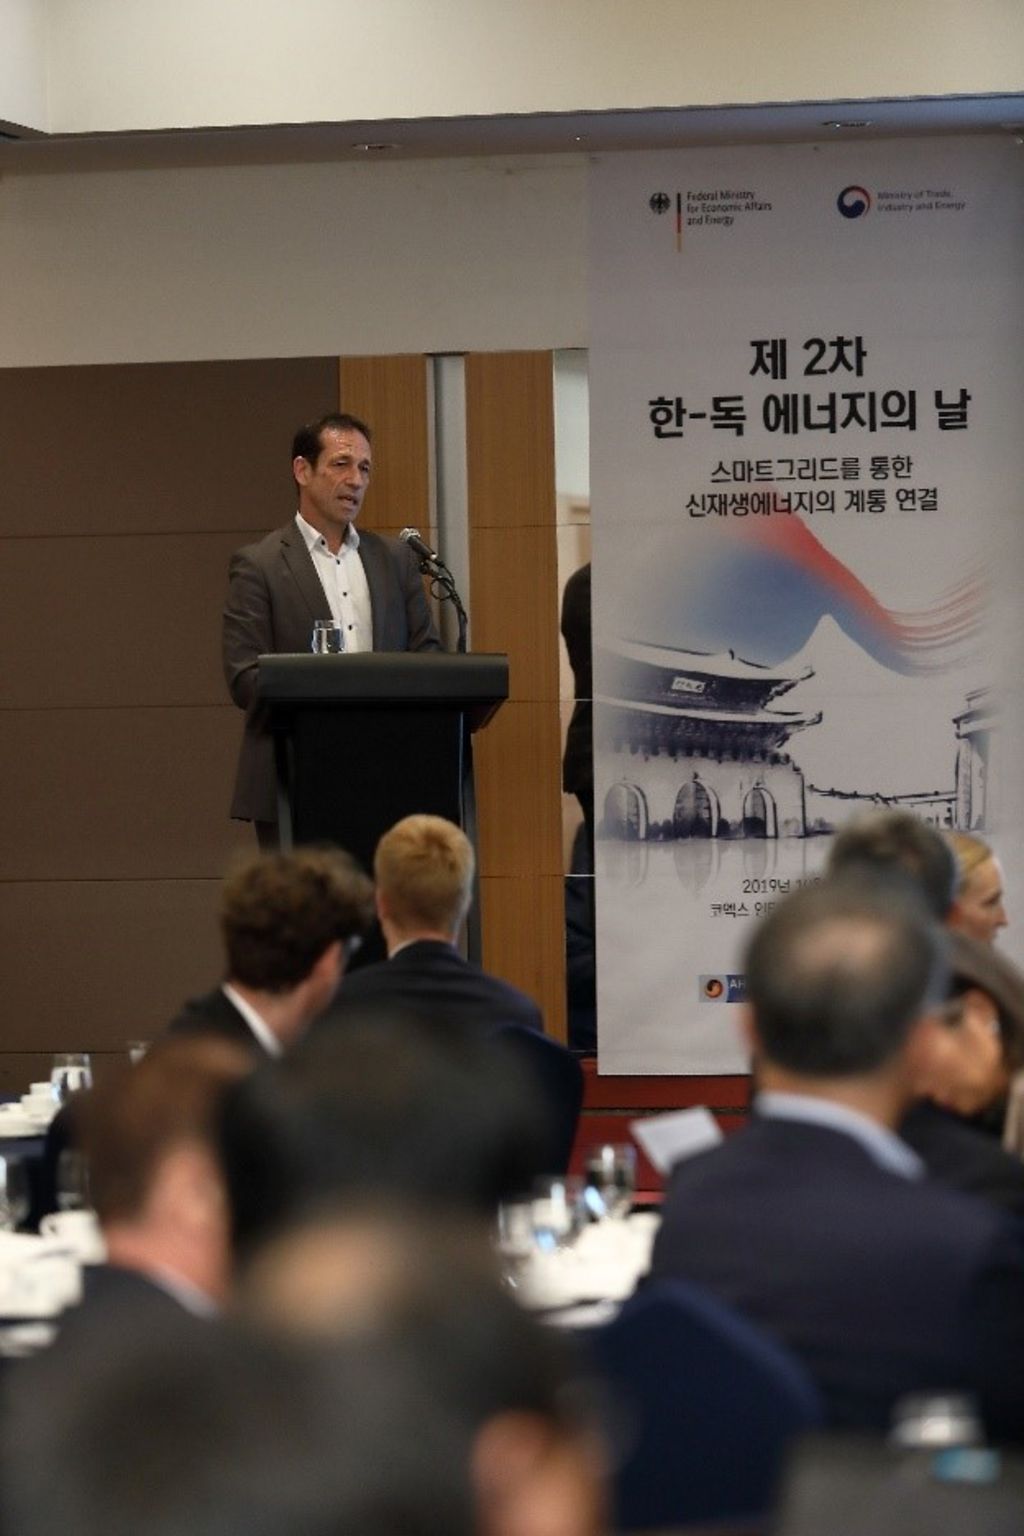 Thorsten Herdan, Director General, Energy Policy (BMWi), gives a keynote speech at the 2nd Korean-German Energy Day. 